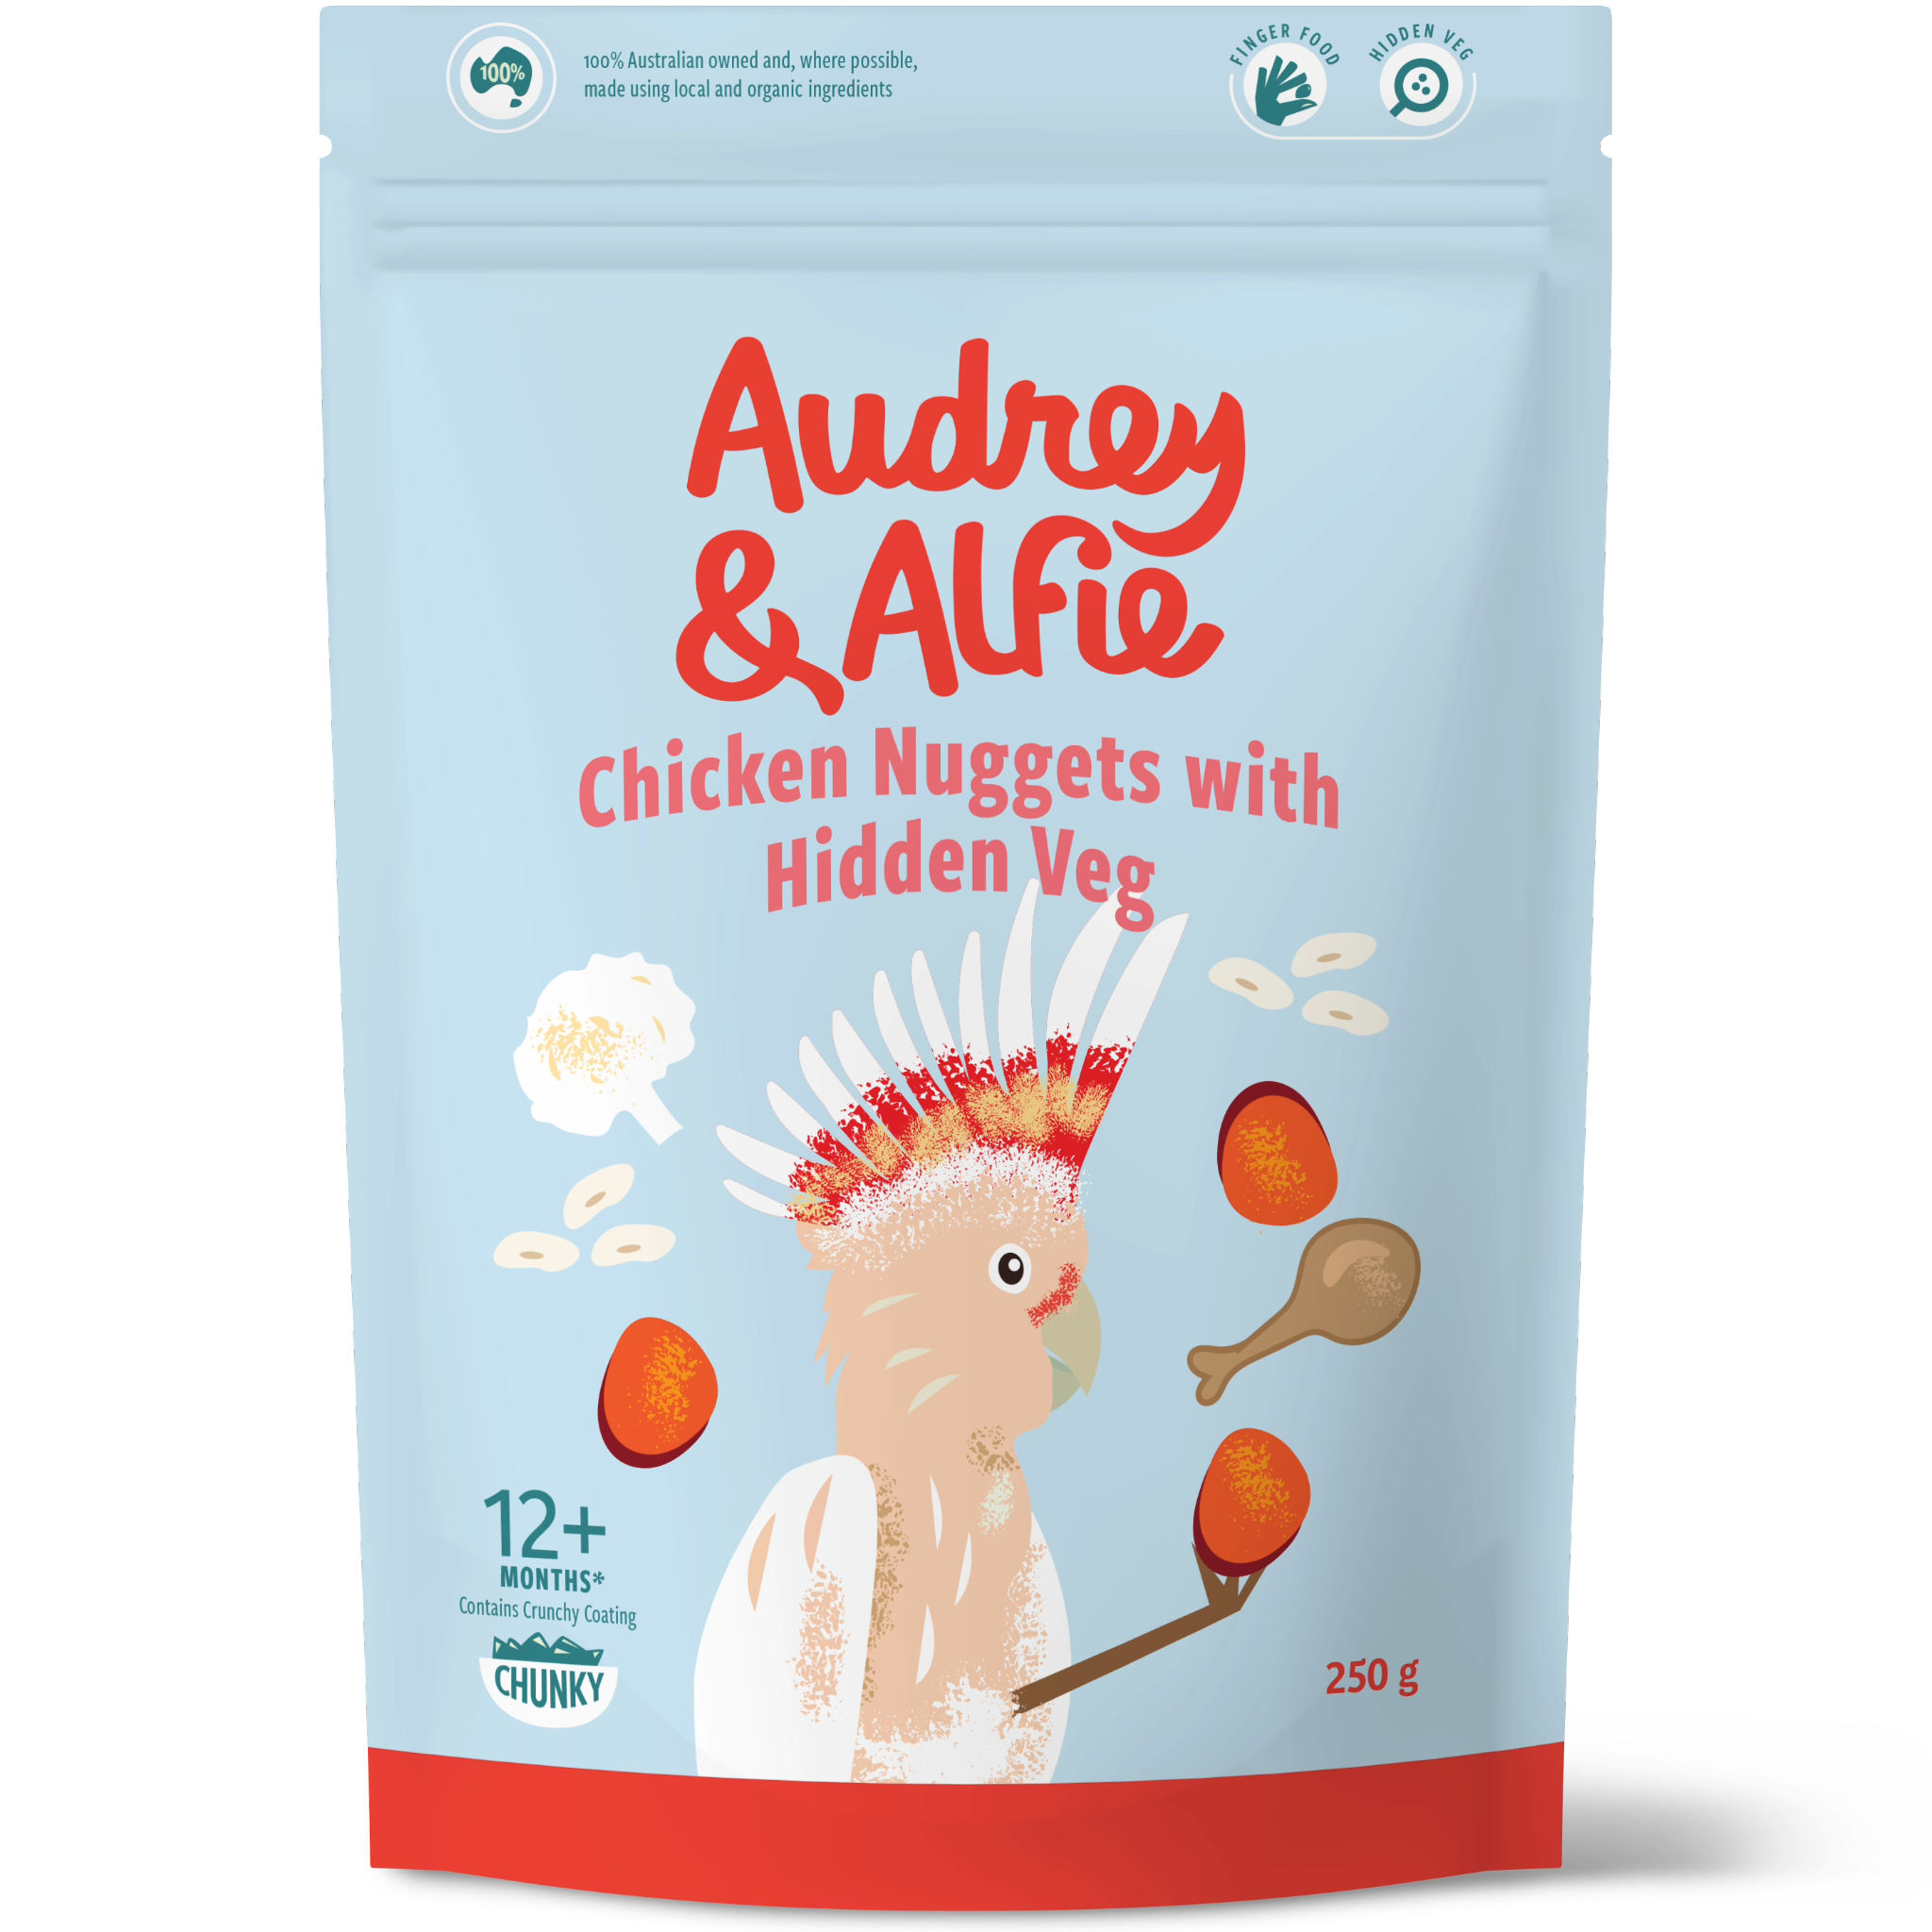 A Packet of Chicken Nuggets with Hidden Veg from Audrey & Alfie's Finger Food Range